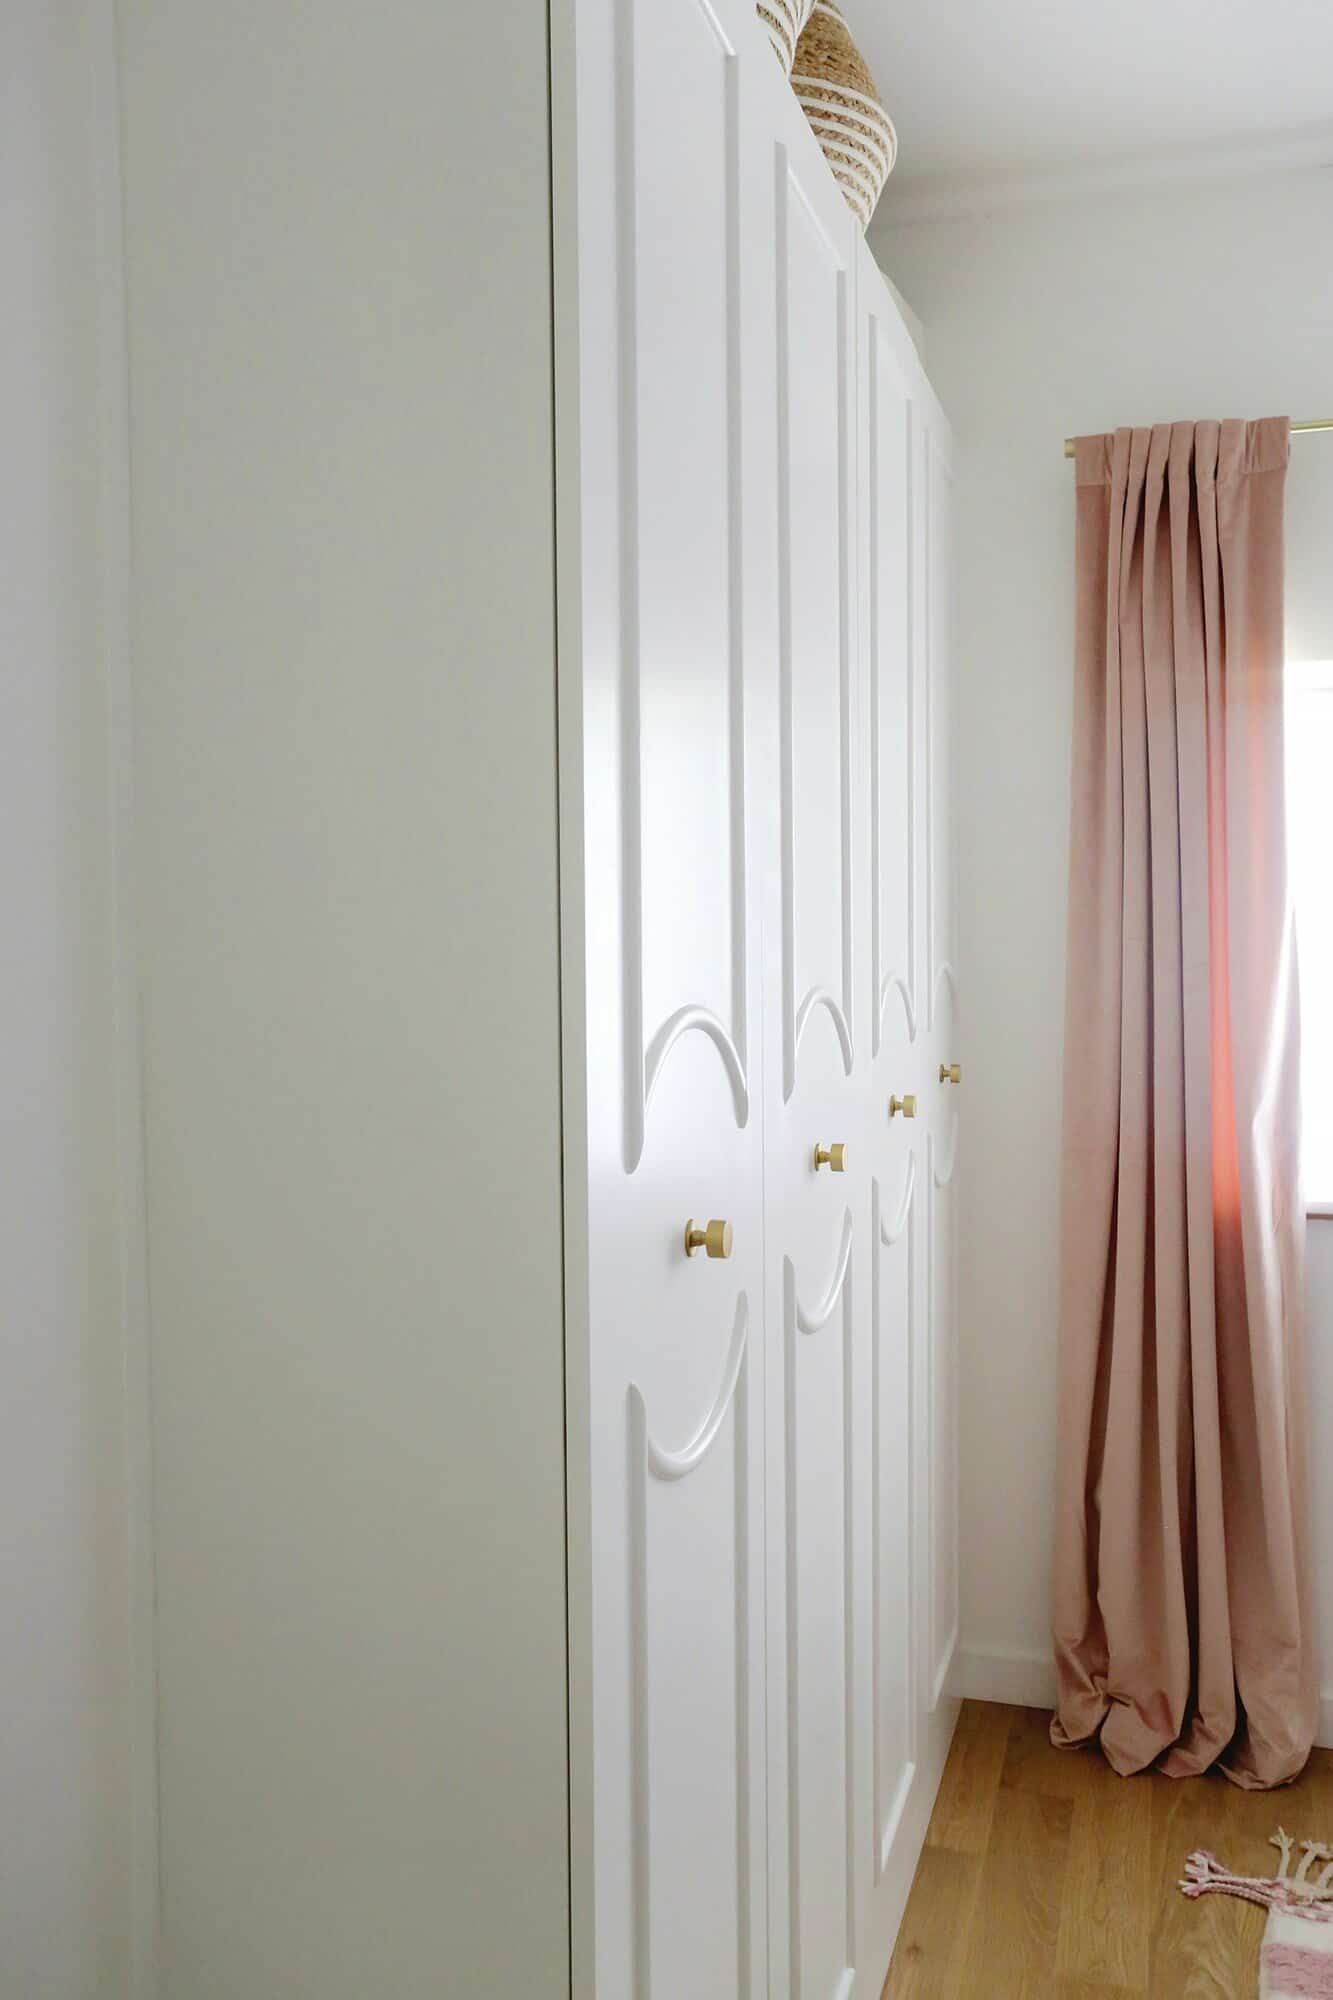 IKEA Pax wardrobes with arched trim added